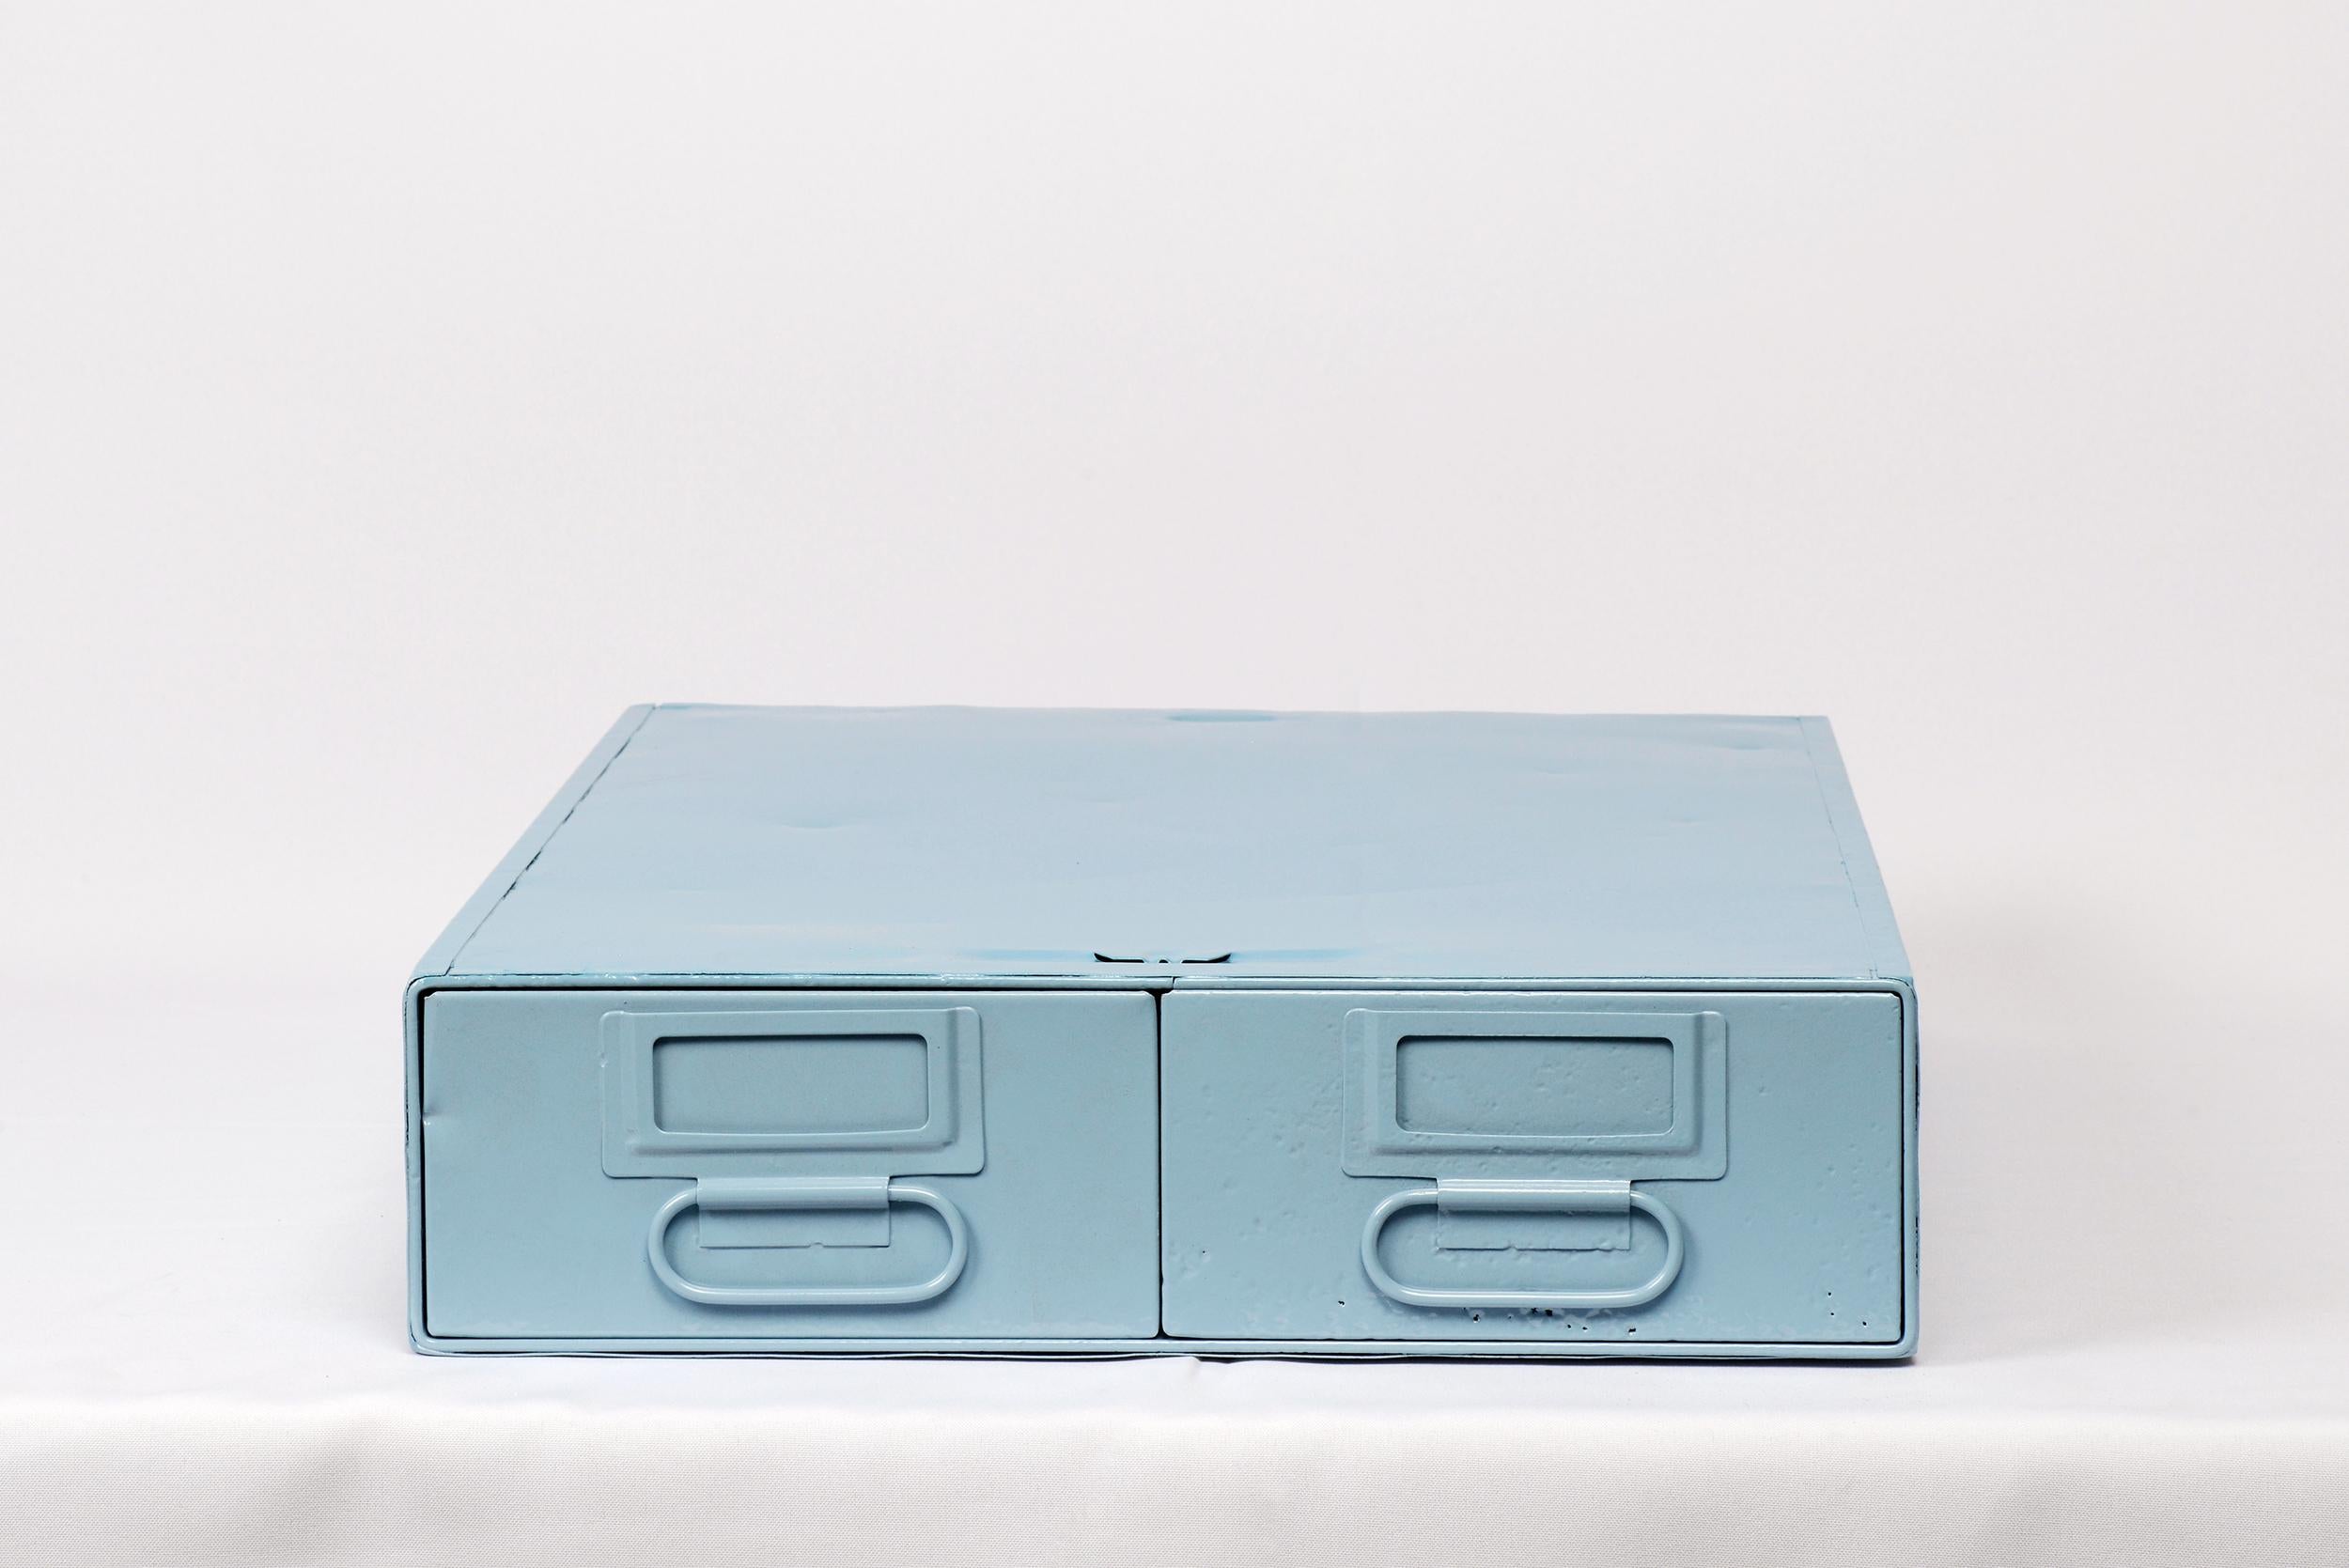 1940s card catalog filing unit with two deep, side by side pull-out drawers. Freshly powder coated steel in gloss sky blue (RAL5024). This heavy-duty organizational unit is perfect for storing anything from office supplies to recipe cards. Great for